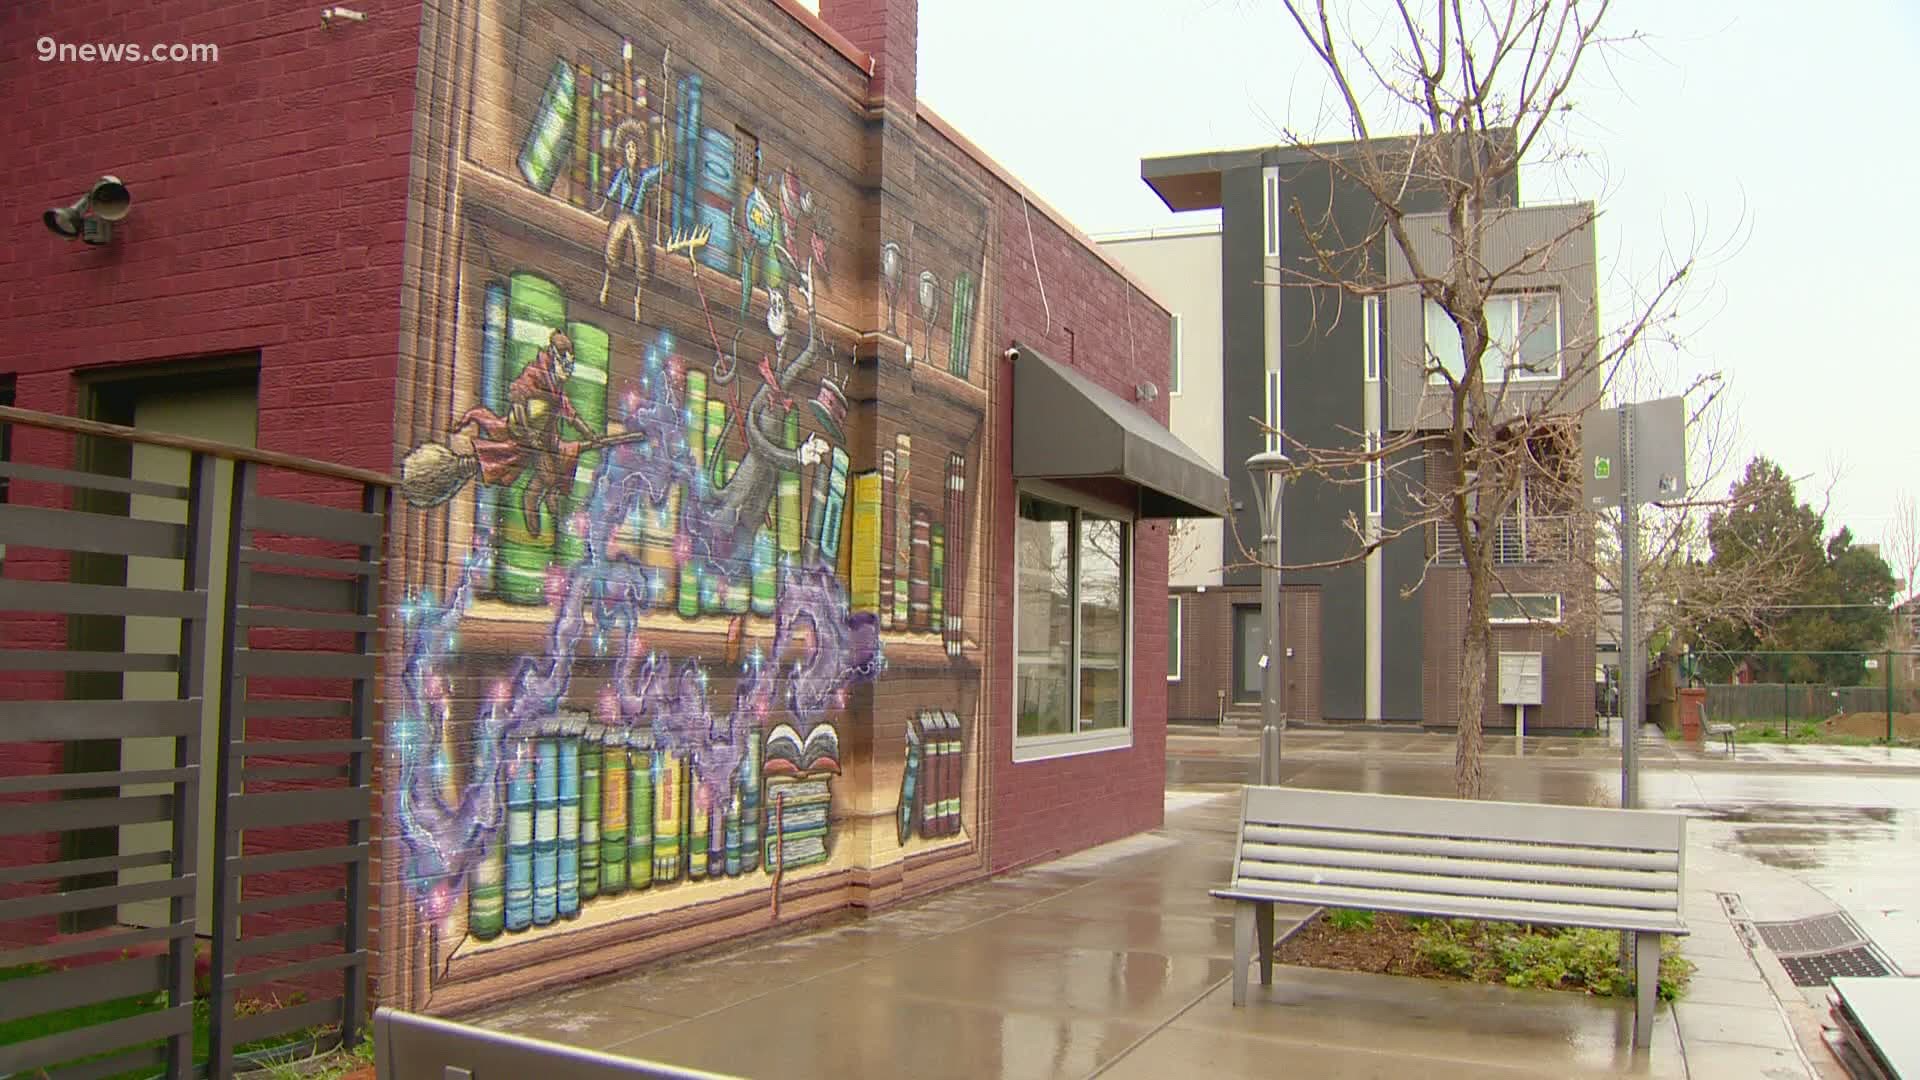 BookBar in Denver furloughed several employees in May. The owner has all but given up on applying for loans and encouraged employees to file for unemployment.